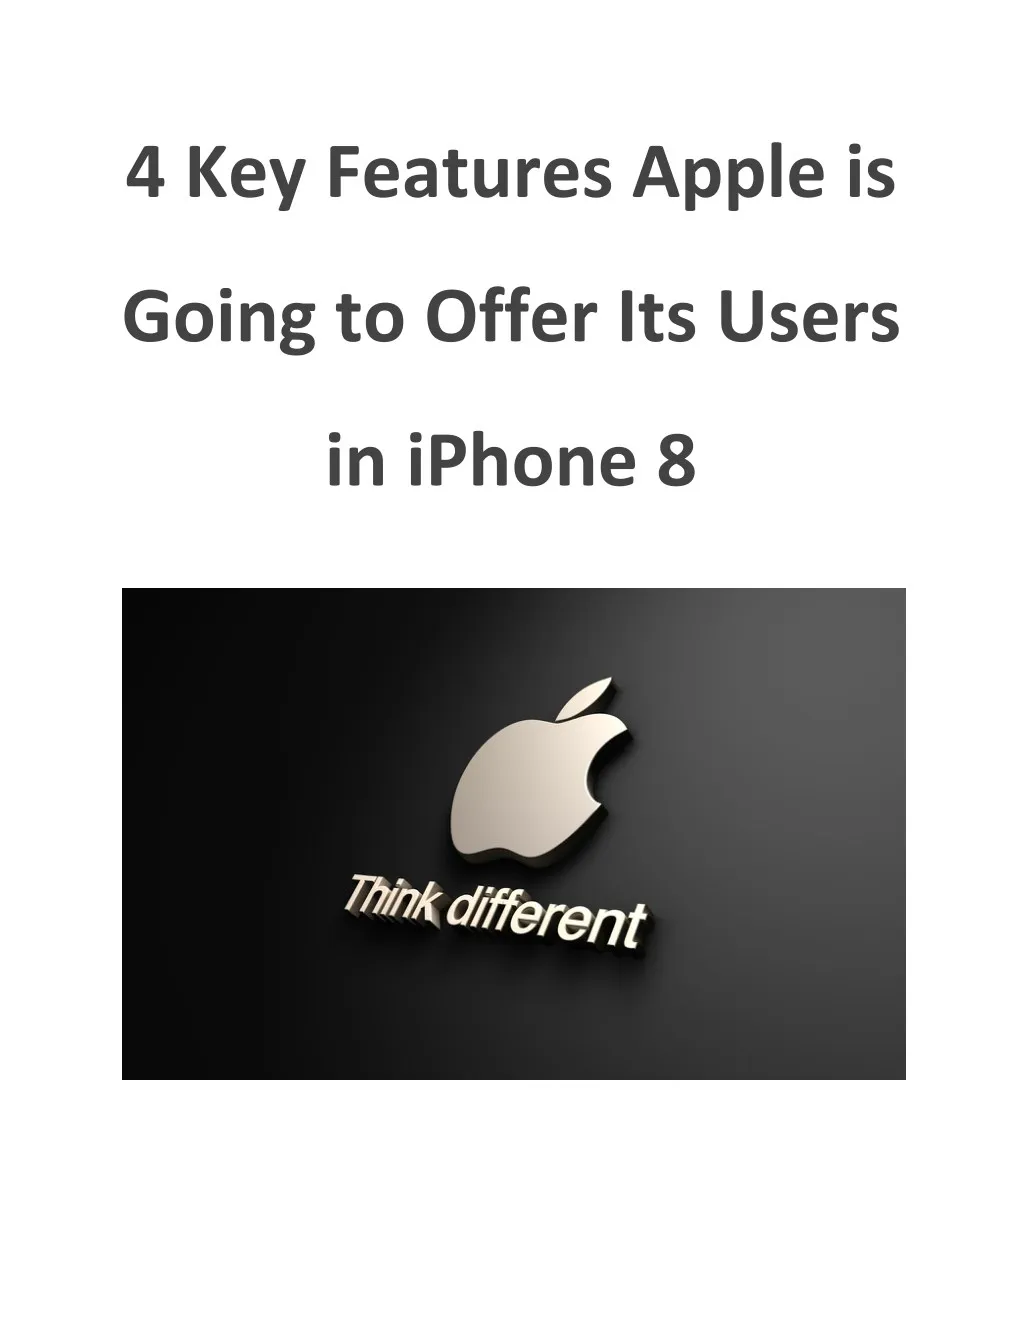 4 key features apple is